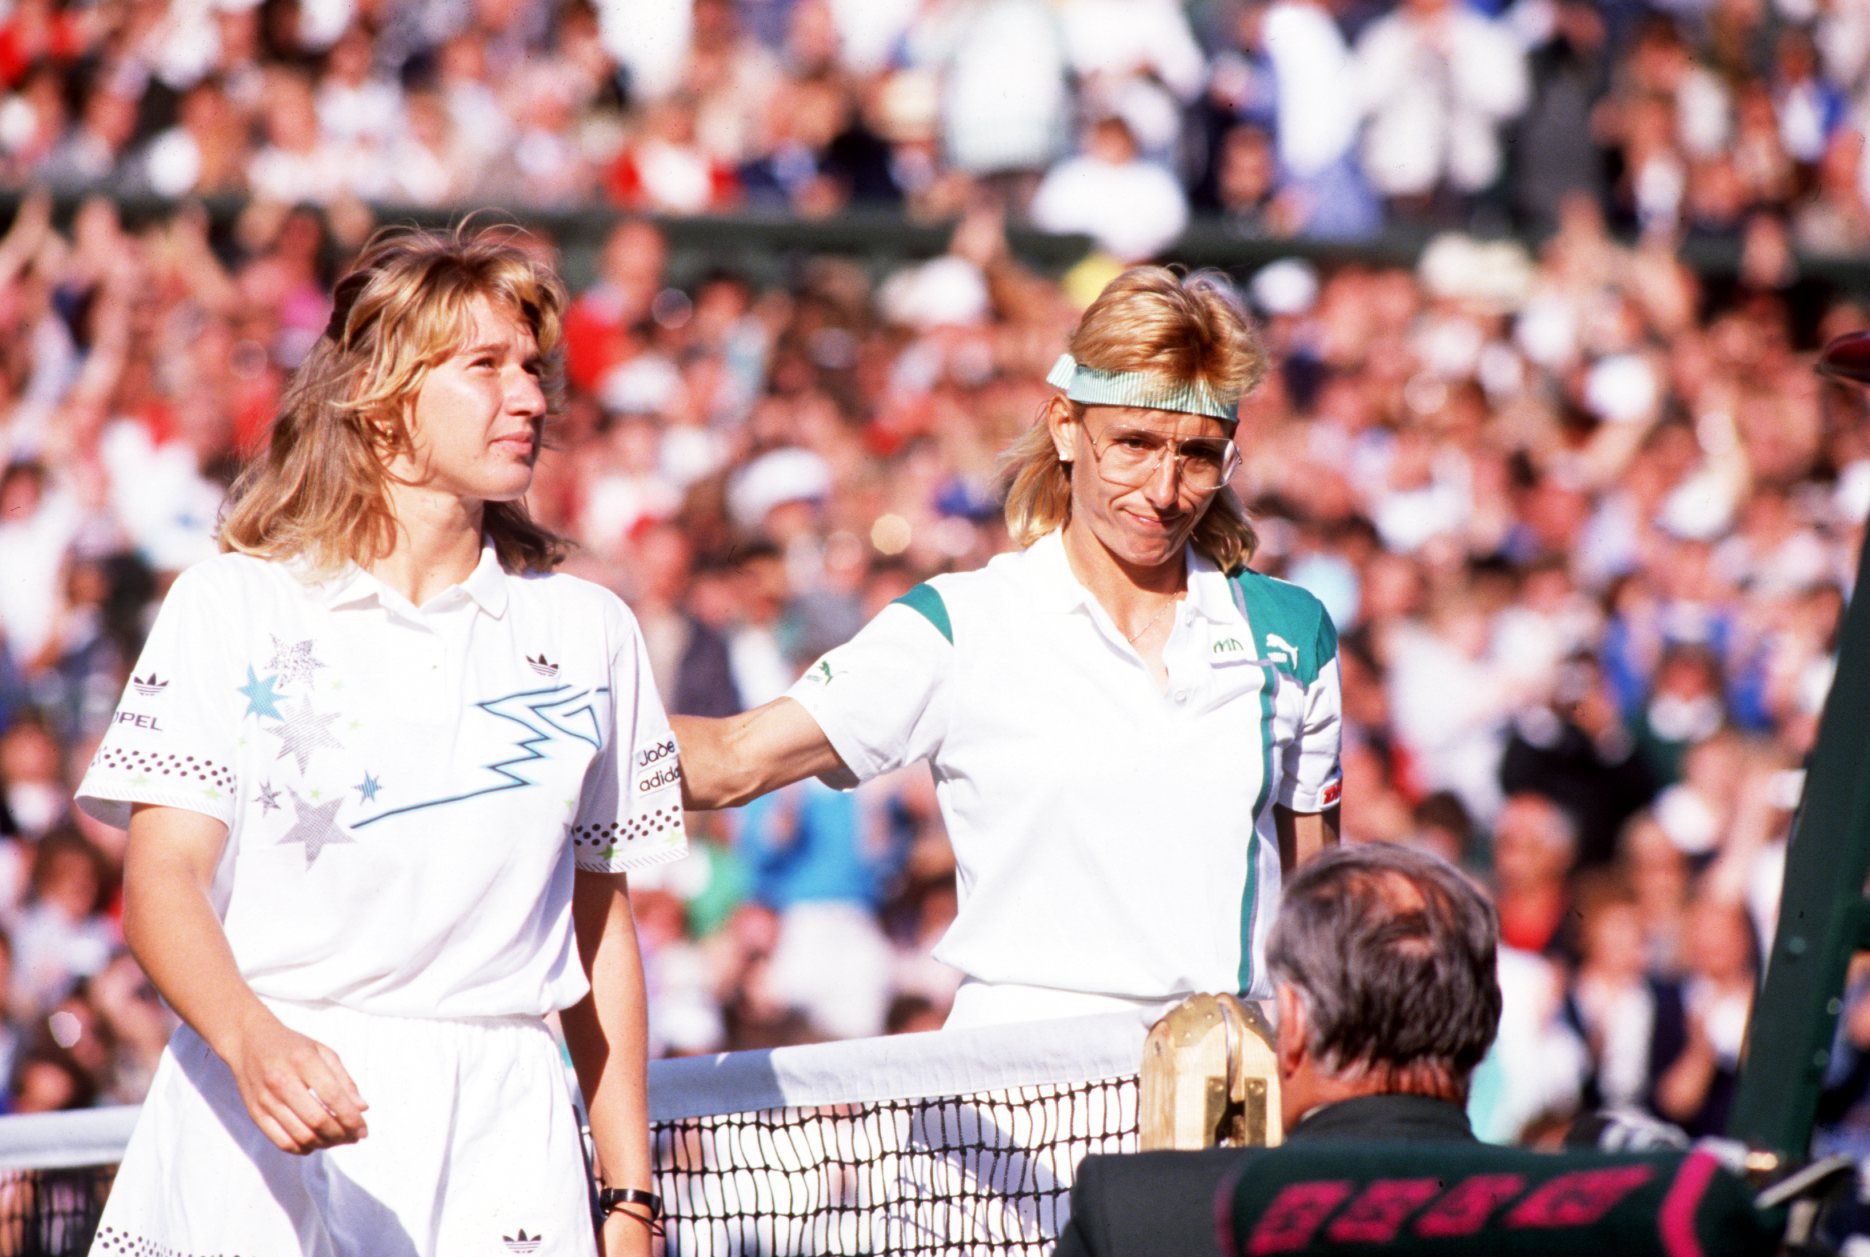 JUL 1988:  STEFFI GRAF OF GERMANY IS PATTED ON THE BACK BY MARTINA NAVRATILOVA OF THE UNITES STATES AFTER THEIR MATCH ON CENTRE COURT DURING THE WIMBLEDON TENNIS CHAMPIONSHIPS. Mandatory Credit: Bob Martin/ALLSPORT